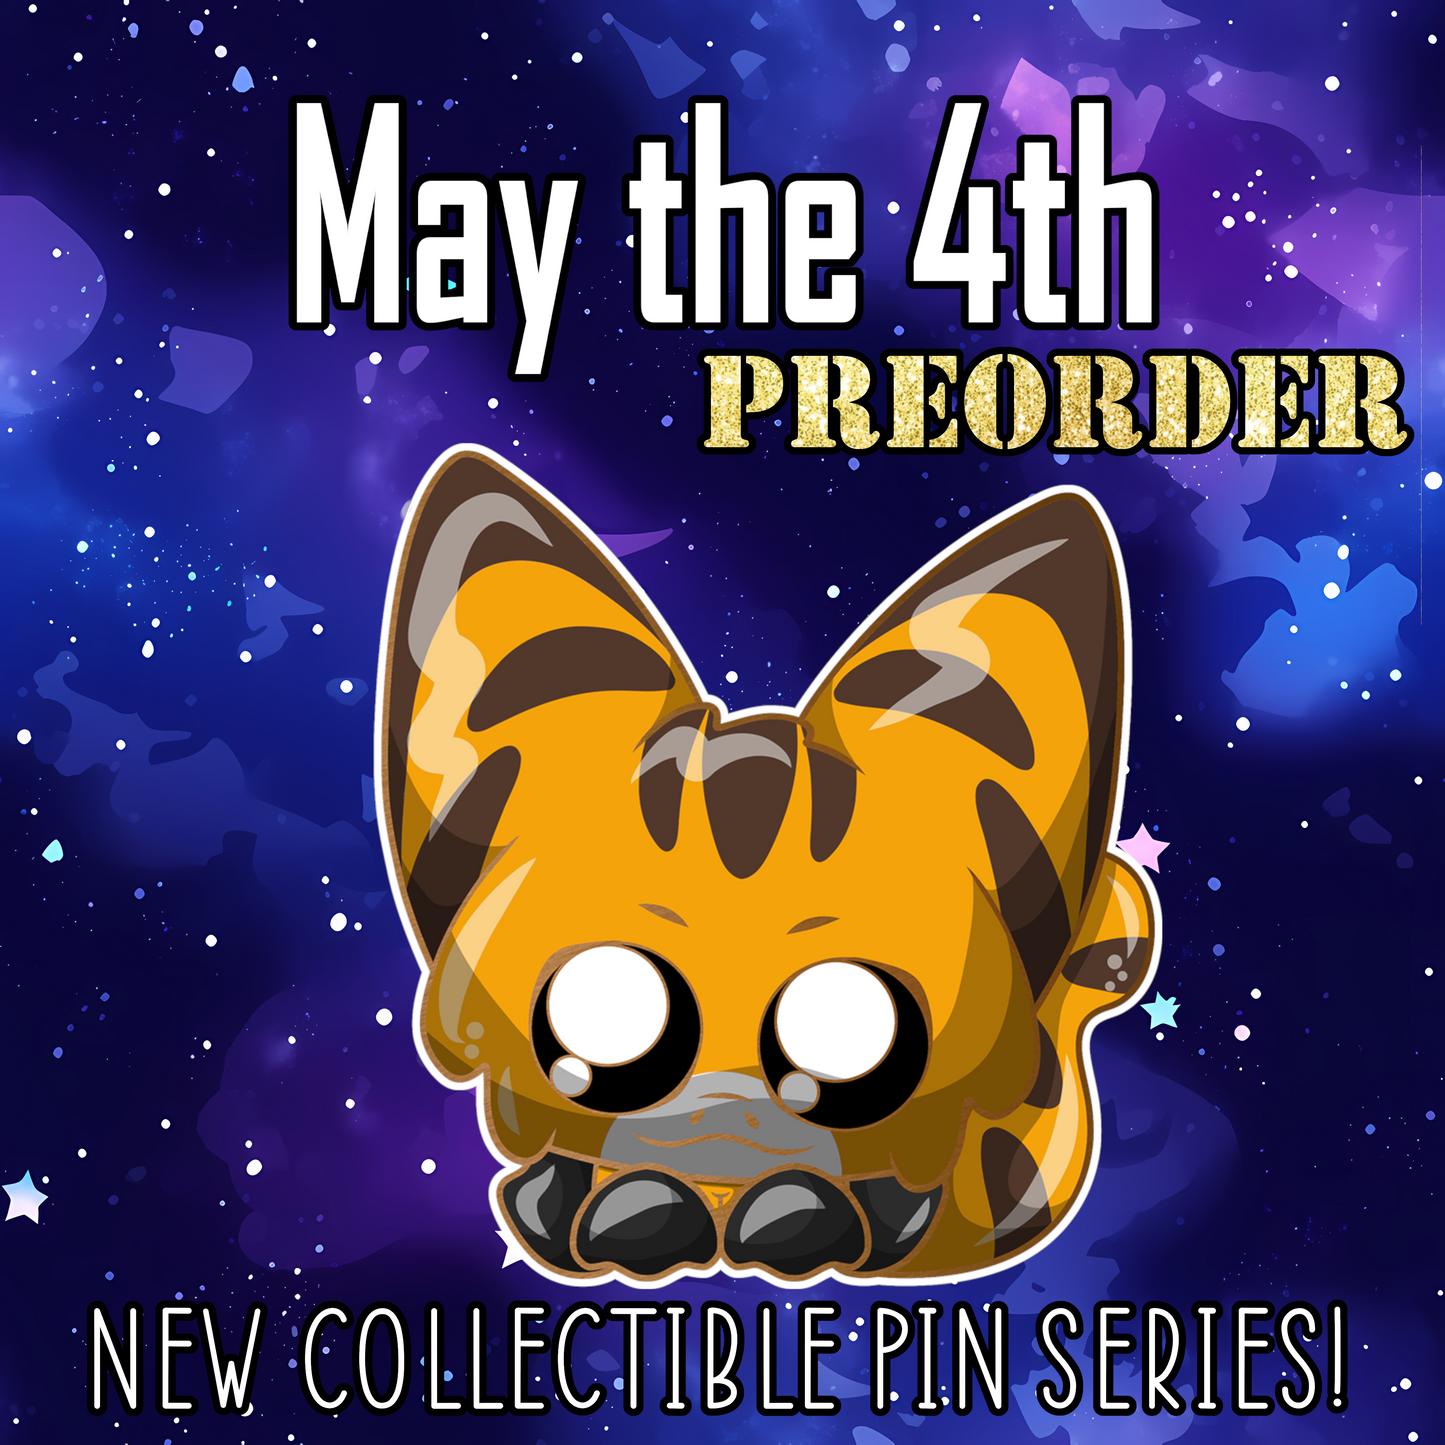 *PREORDER* May the 4th, Space Wars - 2 Pins & 2 Stickers